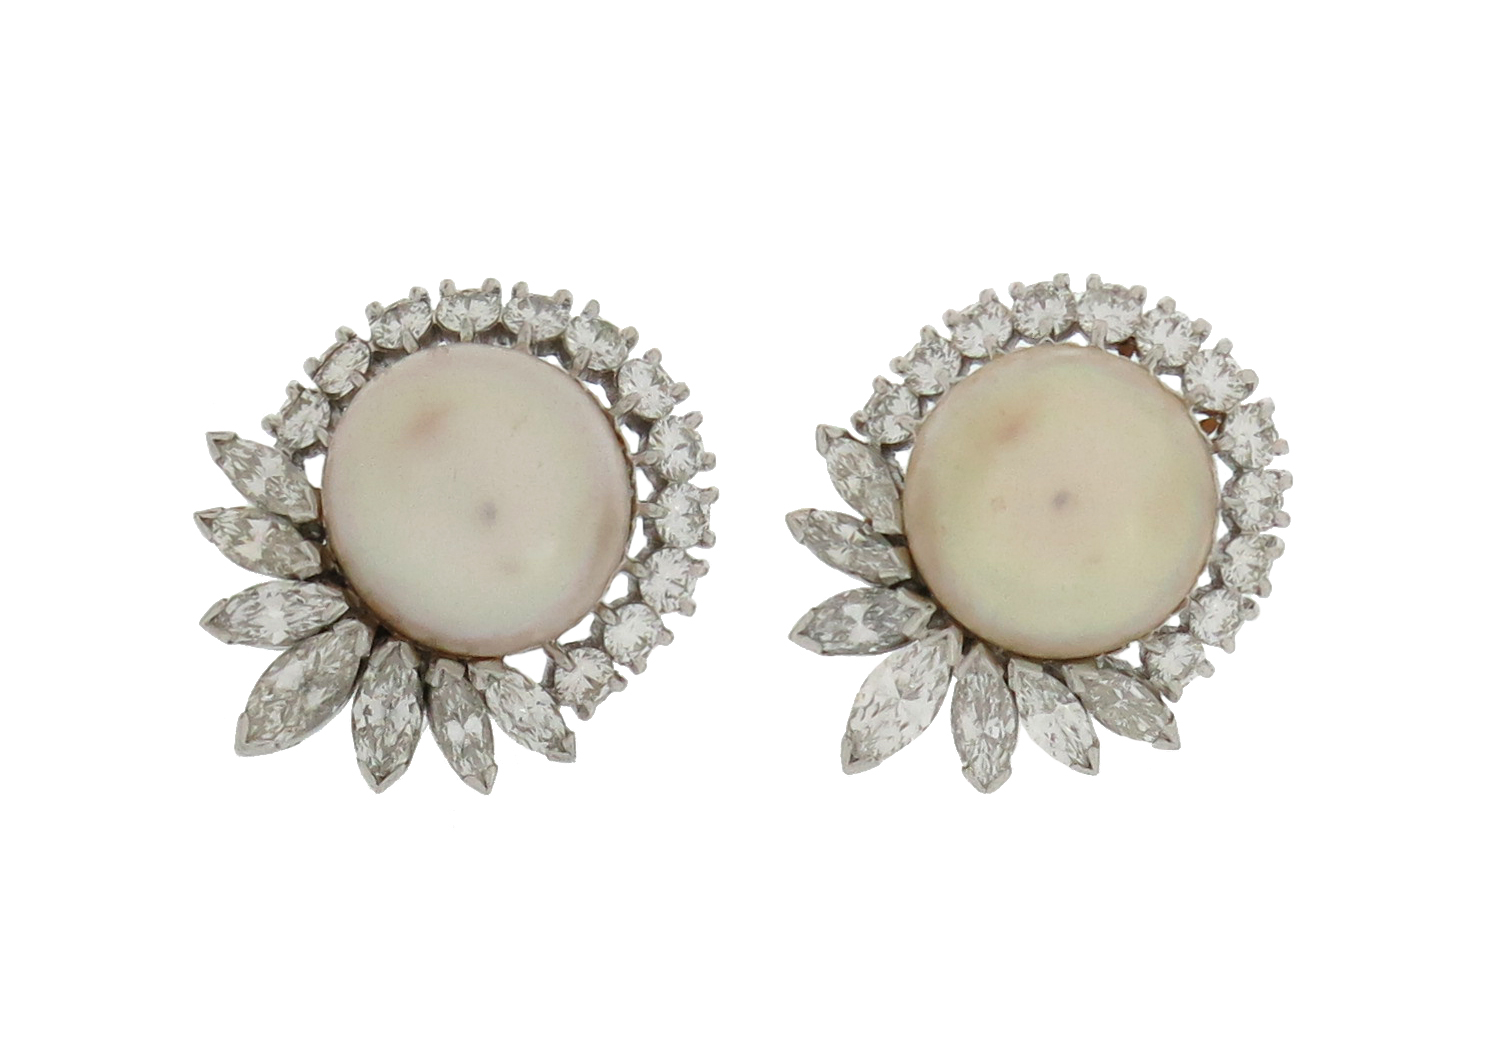 A pair of natural pearl and diamond cluster earrings, the button-shaped pearls are set within a - Image 2 of 5